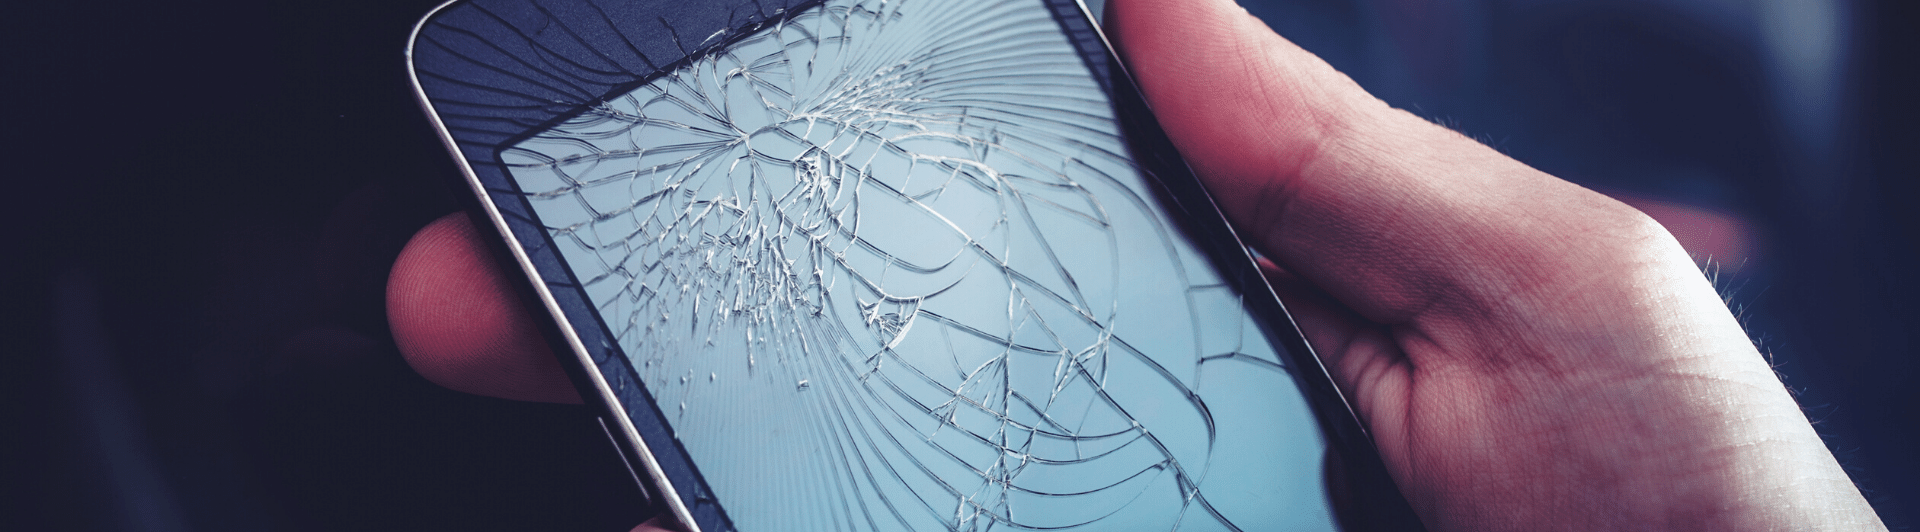 cell phone with cracked glass screen